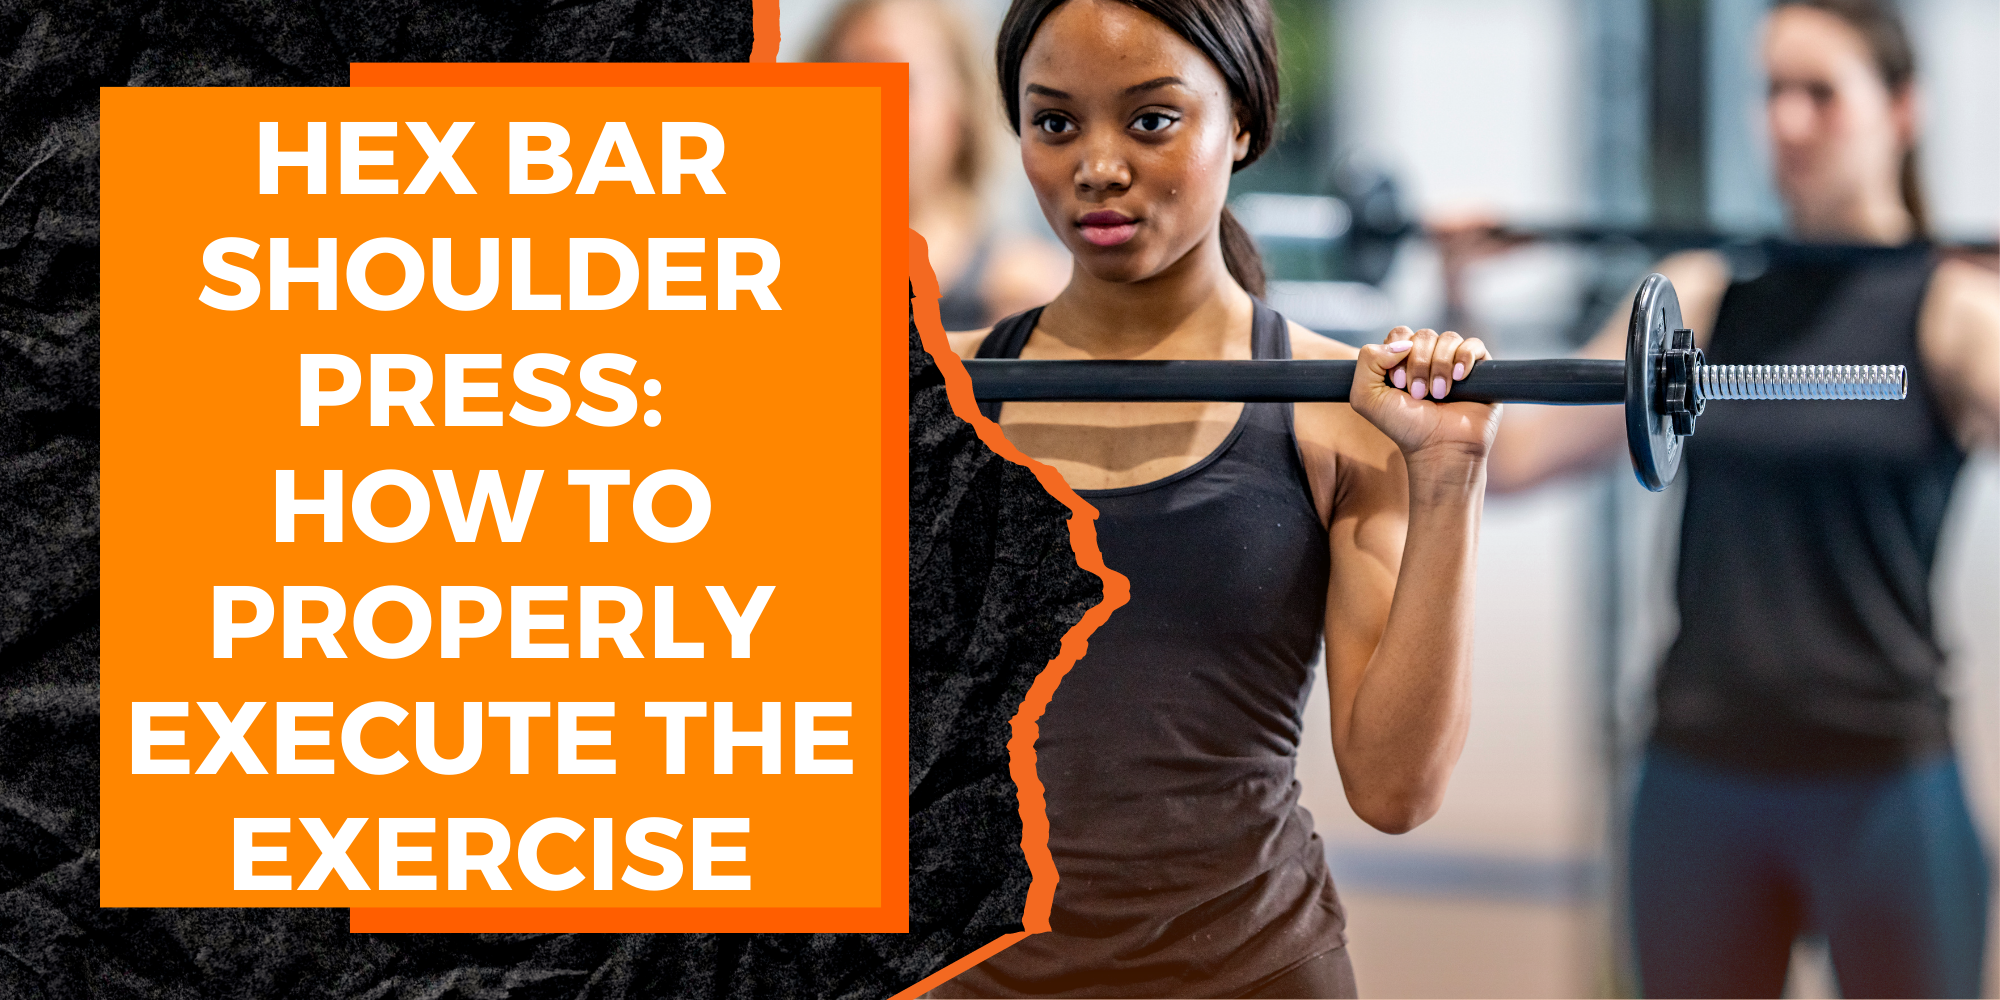 Hex Bar Shoulder Press: How to Properly Execute the Exercise